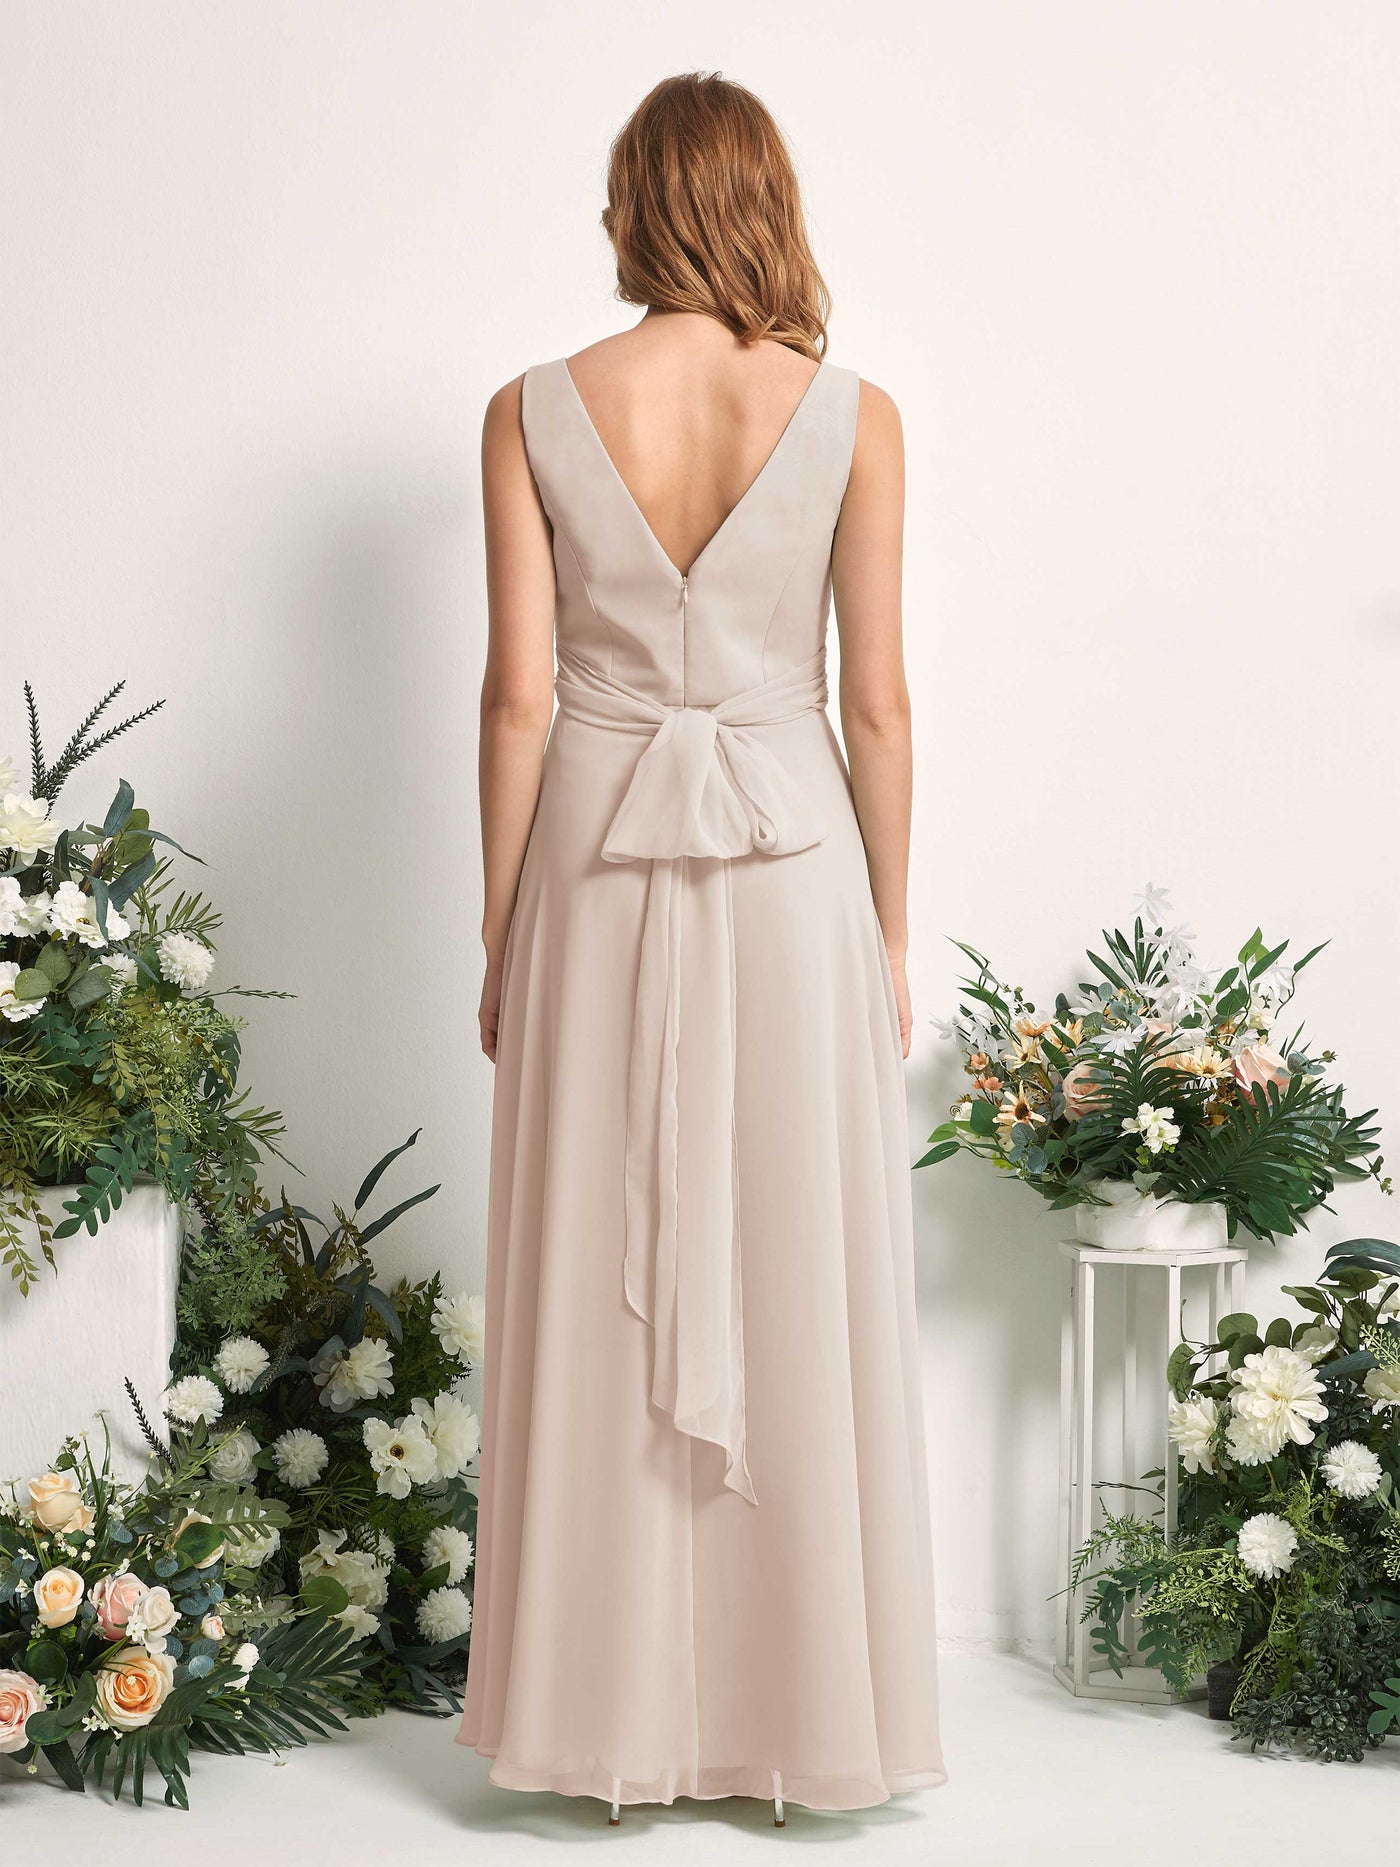 Bridesmaid Dress A-line Chiffon Straps Full Length Sleeveless Wedding Party Dress - Champagne (81227316)#color_champagne